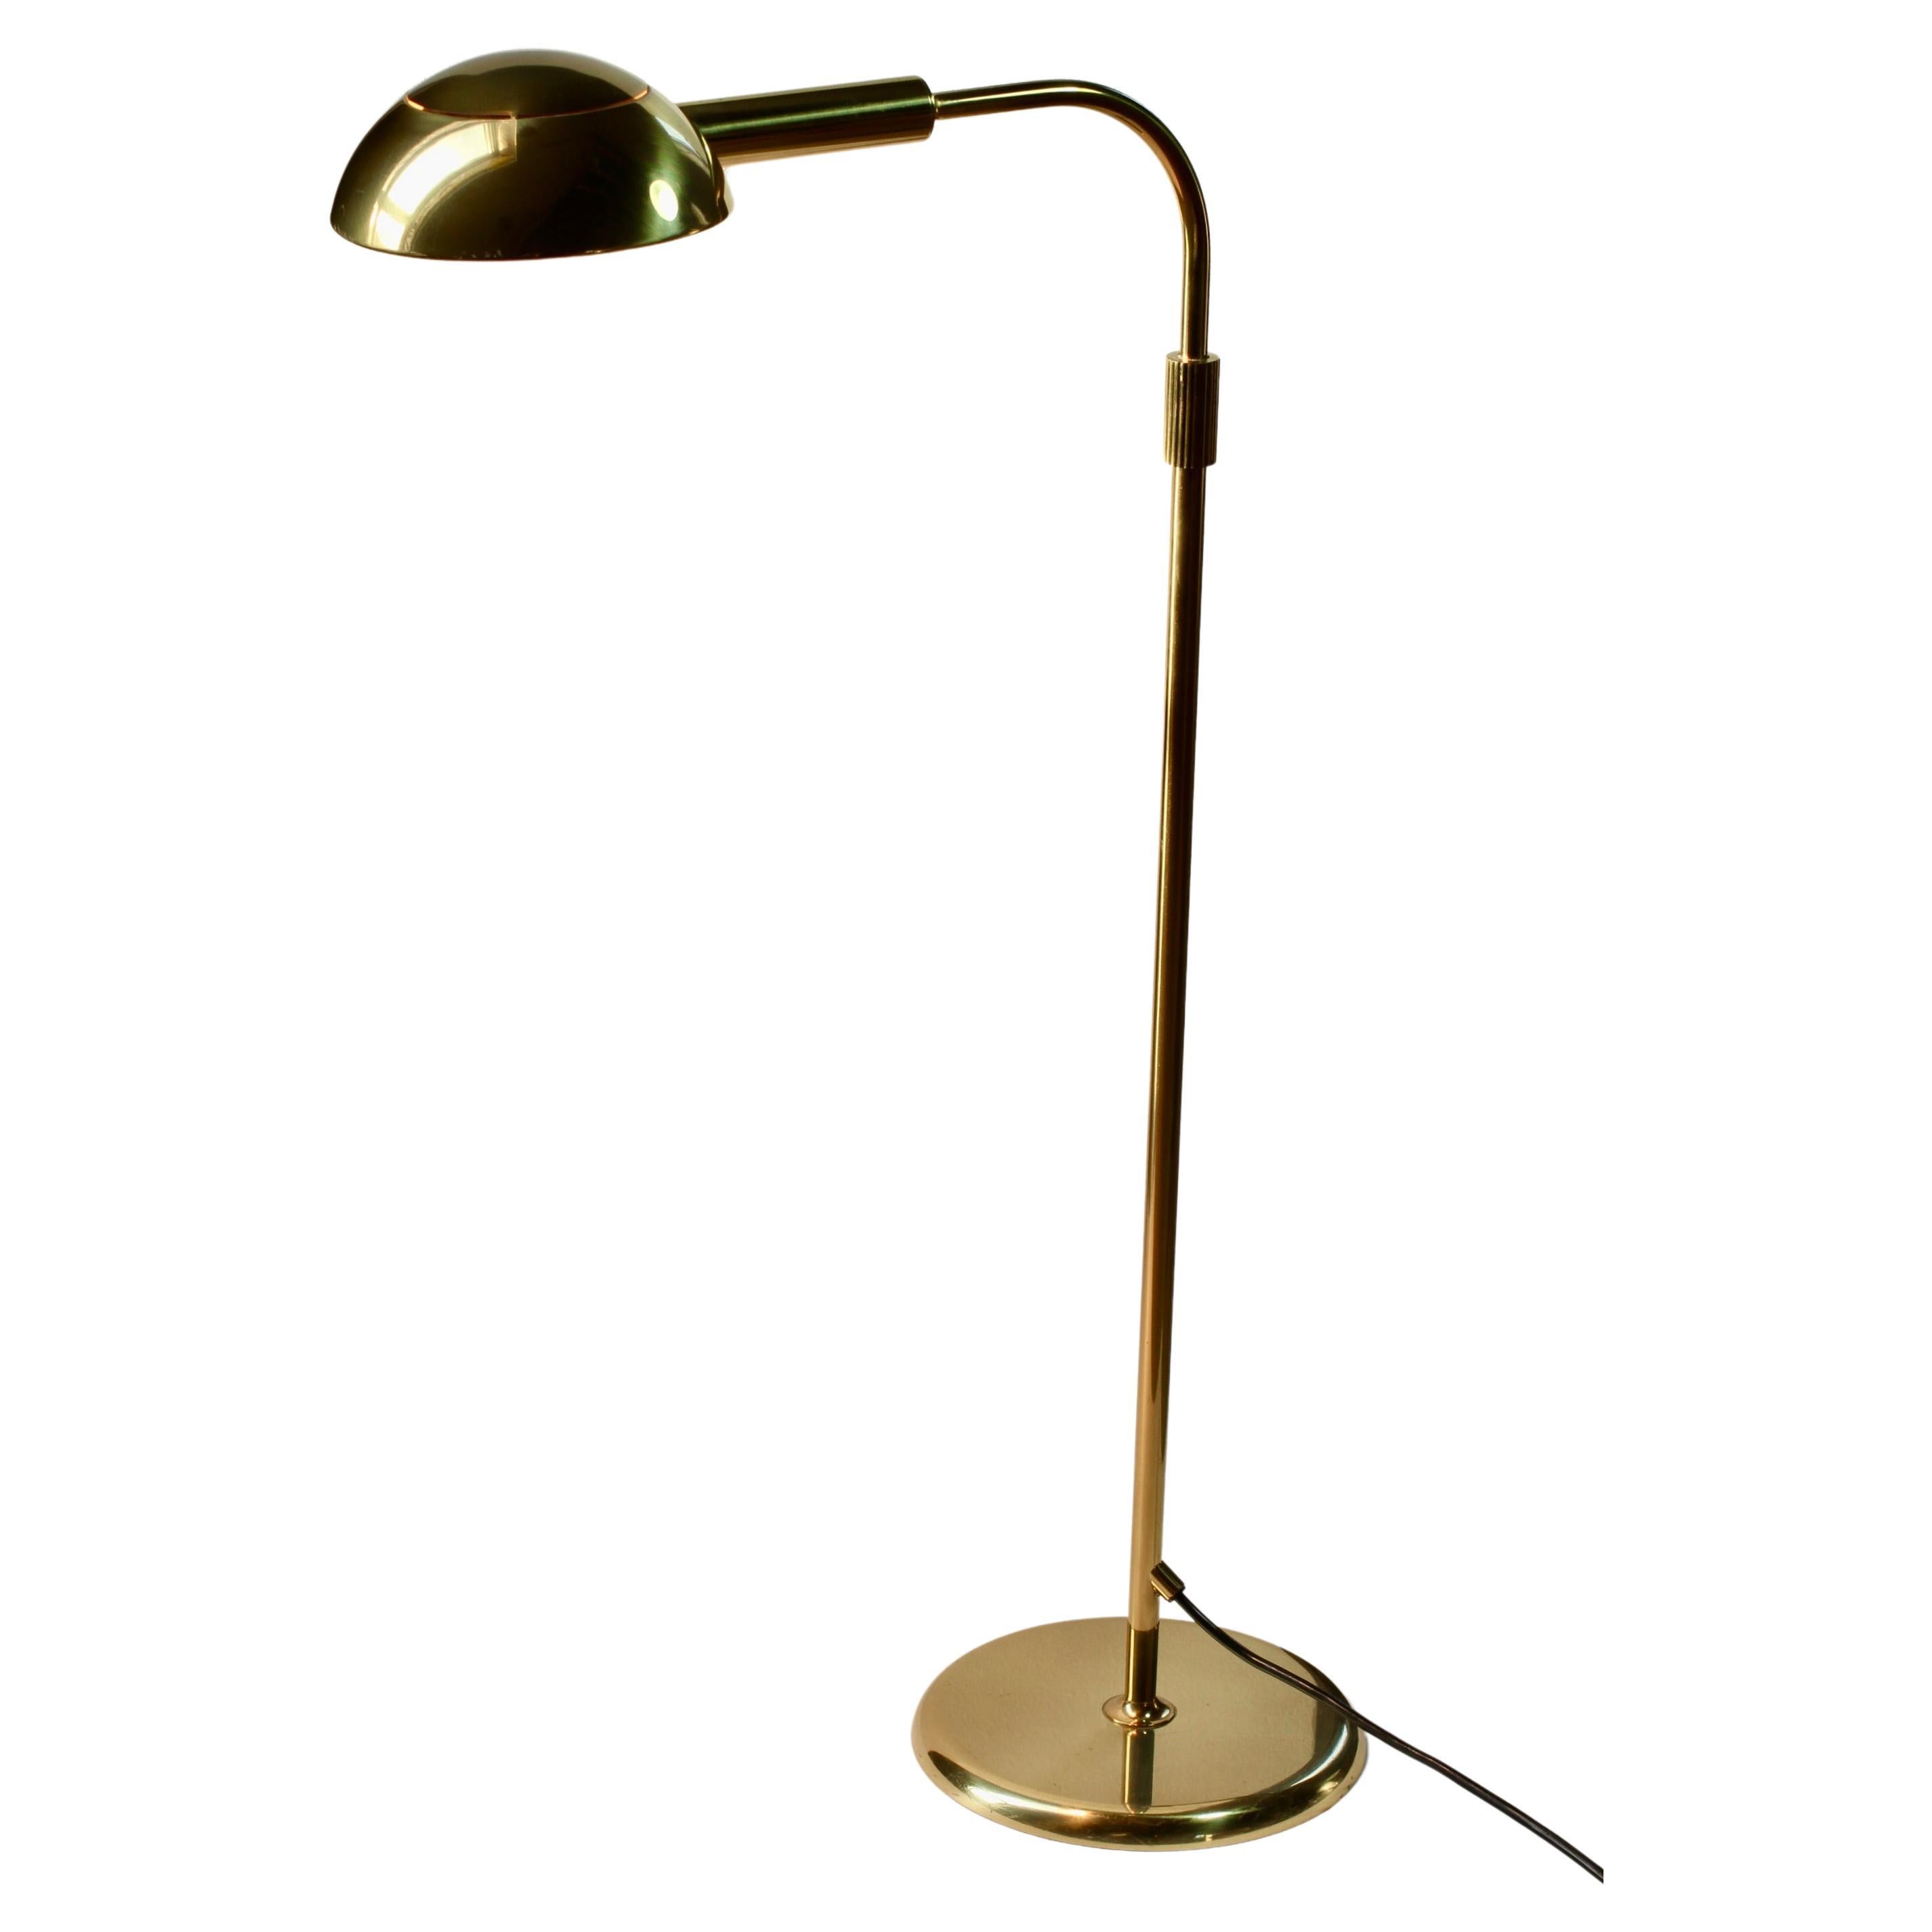 Polished Florian Schulz Mid-Century Vintage Modernist Brass 1970s Dimmable Floor Lamp